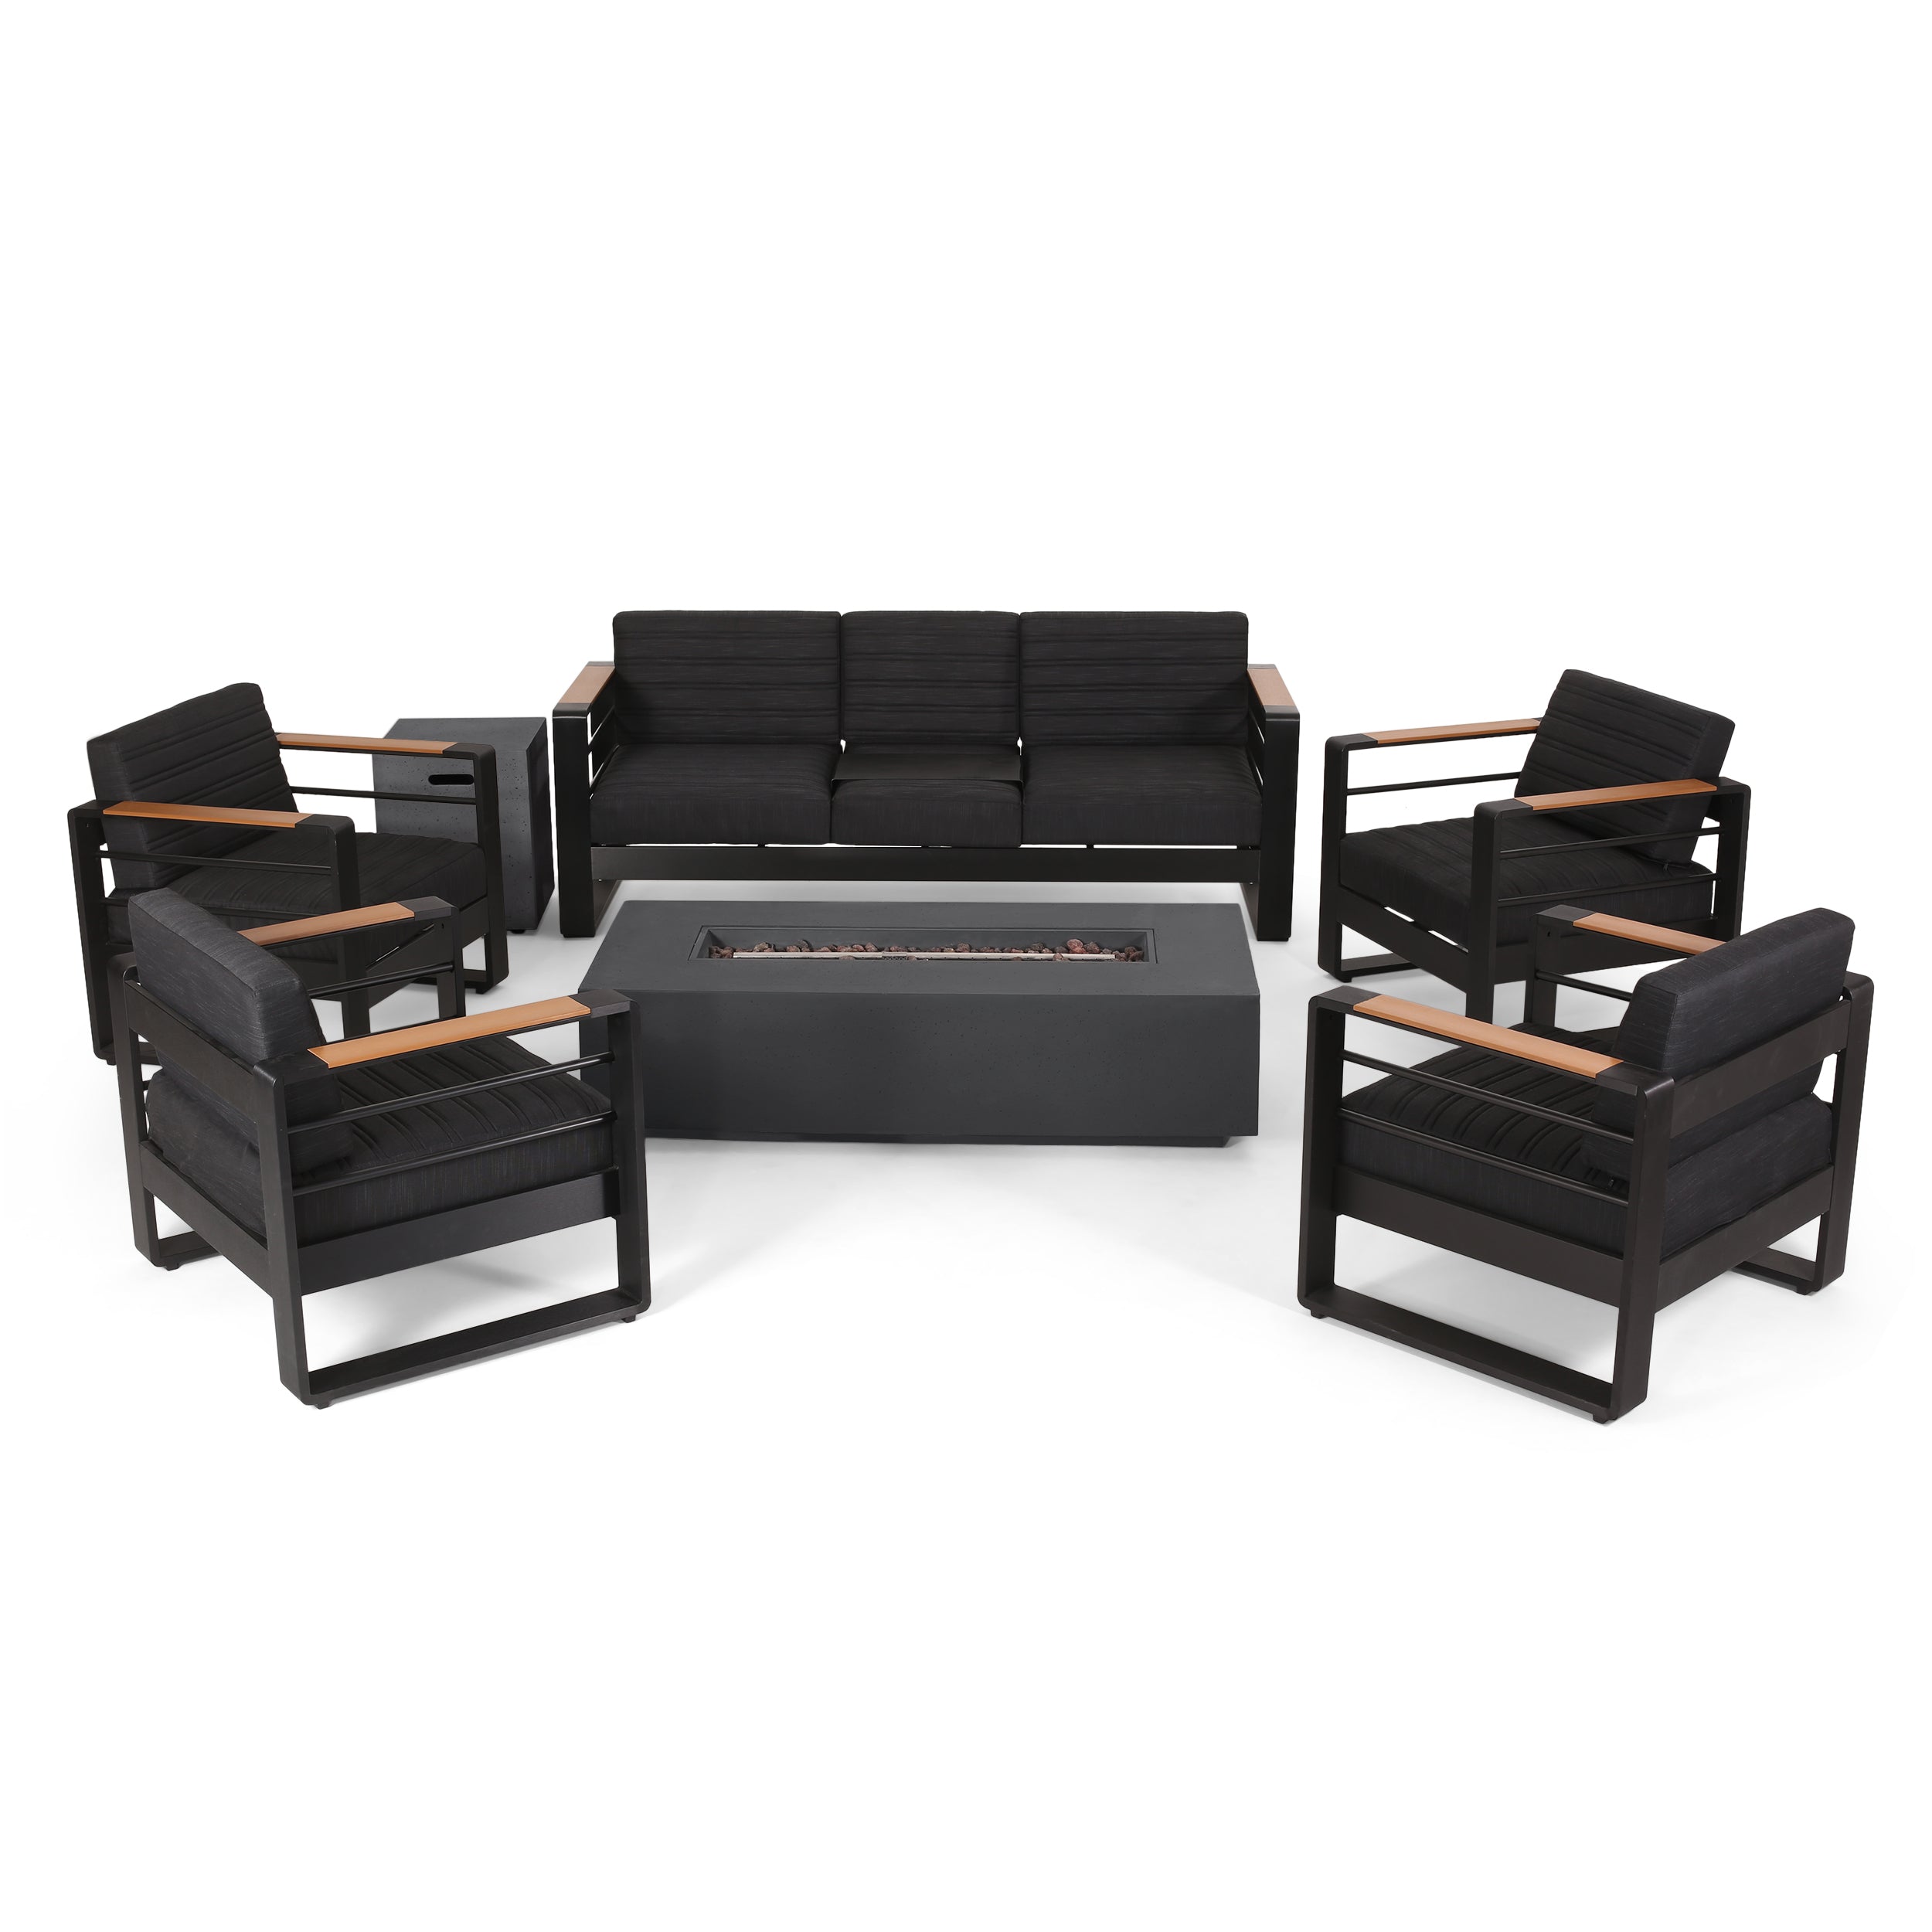 Neffs Outdoor Aluminum 7 Seater Chat Set with Fire Pit Black Natural and Dark Gray